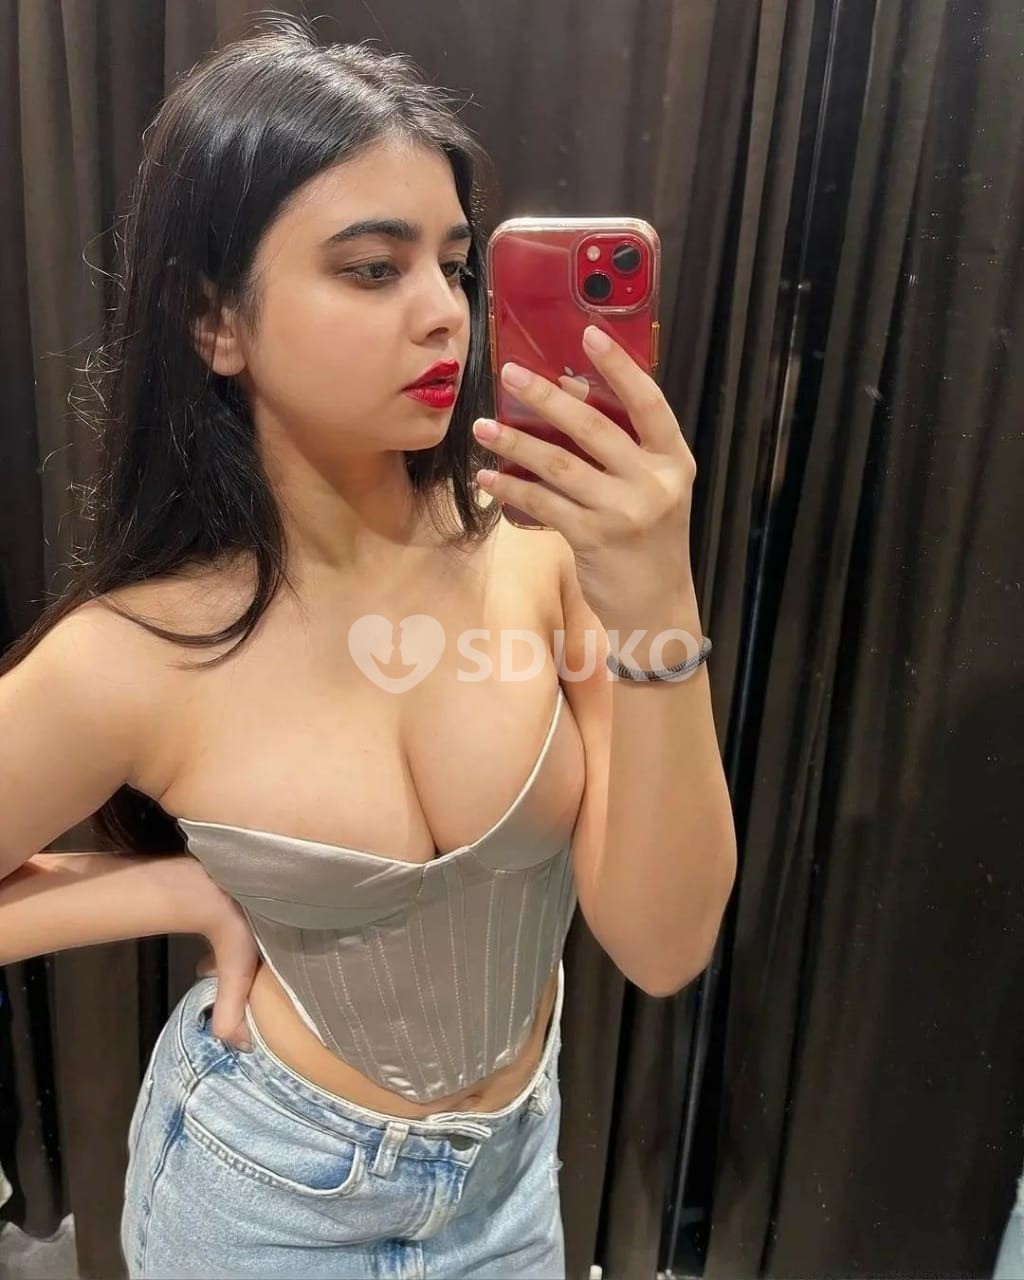 PUNE ALL AREA VIP TODAY LOW !;PRICE ESCORT 🥰SERVICE 100% SAFE AND SECURE ANYTIME CALL ME 24 X 7 SERVICE AVAILABLE 100